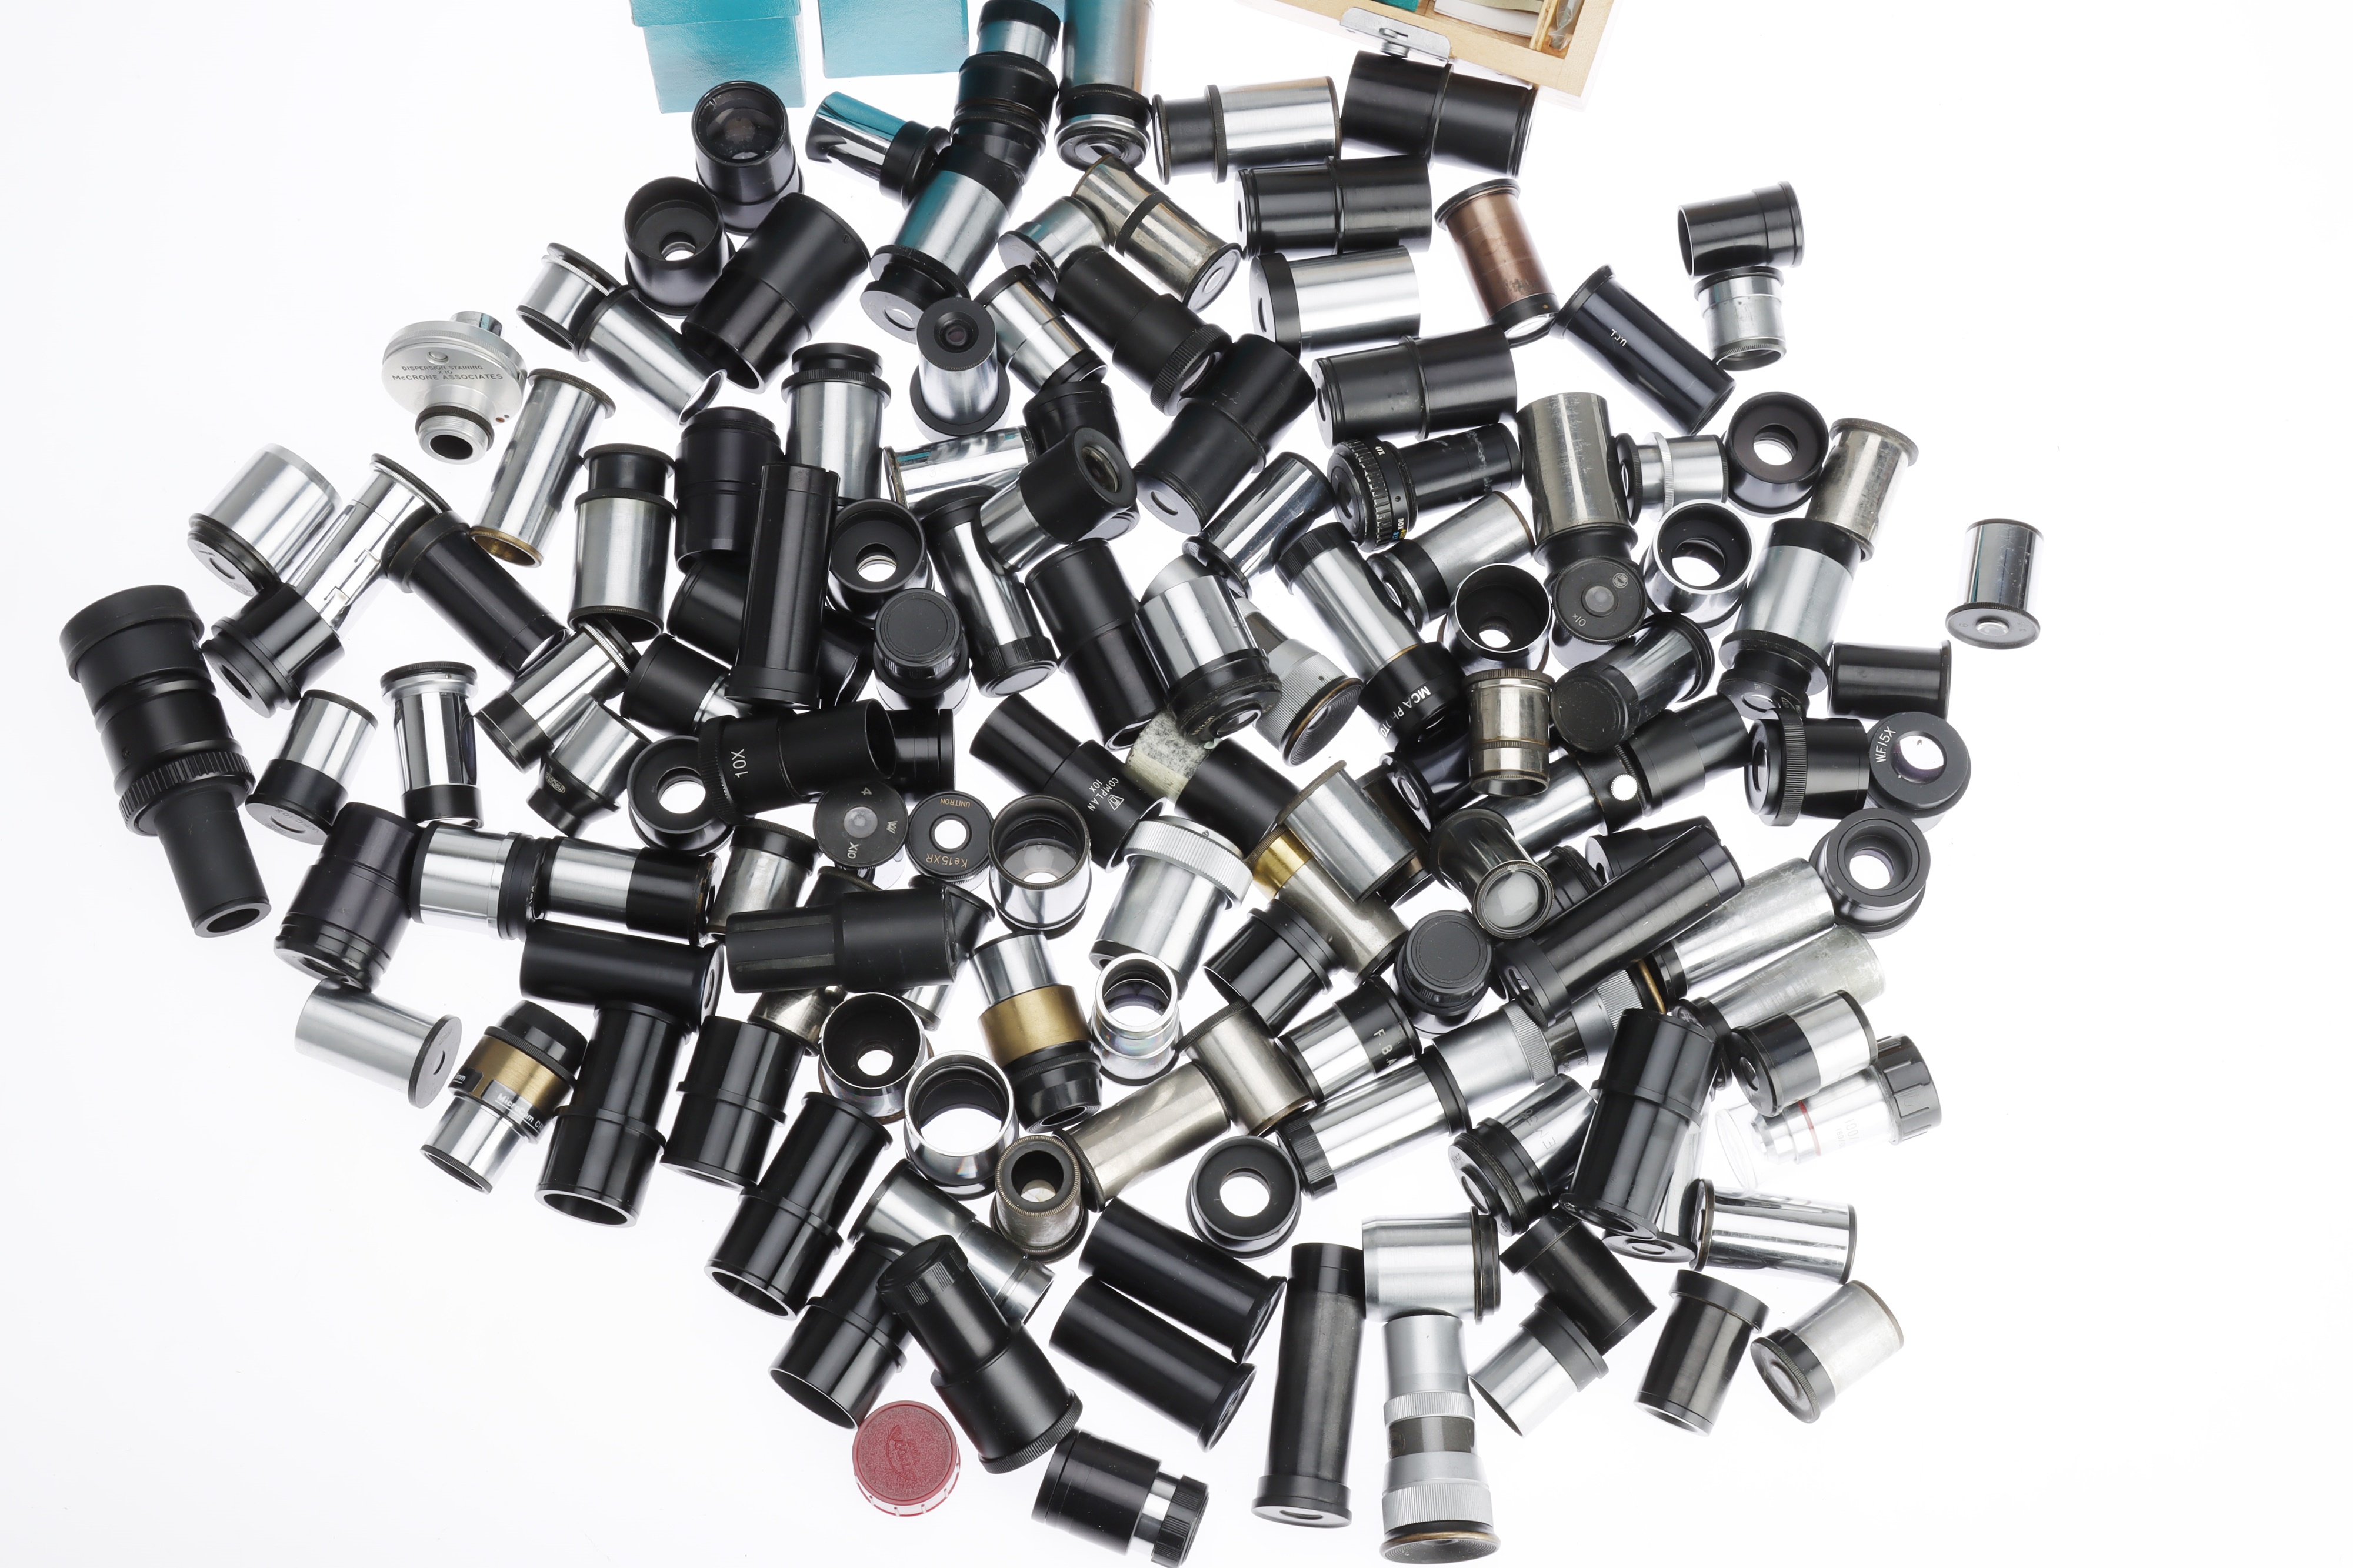 Large Collection of Modern Microscope Eyepieces - Image 2 of 3